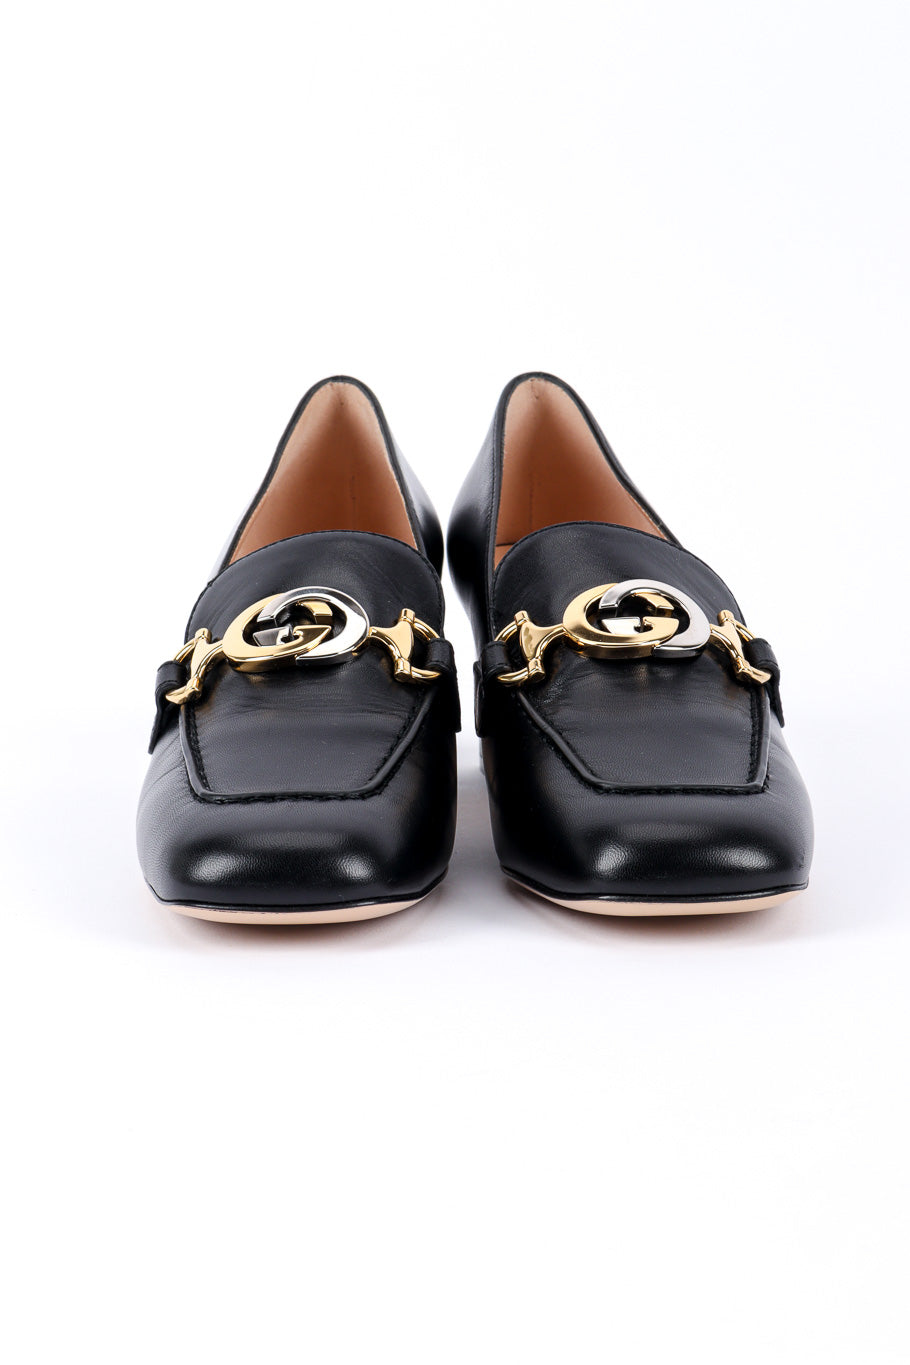 Horsebit loafers by Gucci on white background from front @recessla